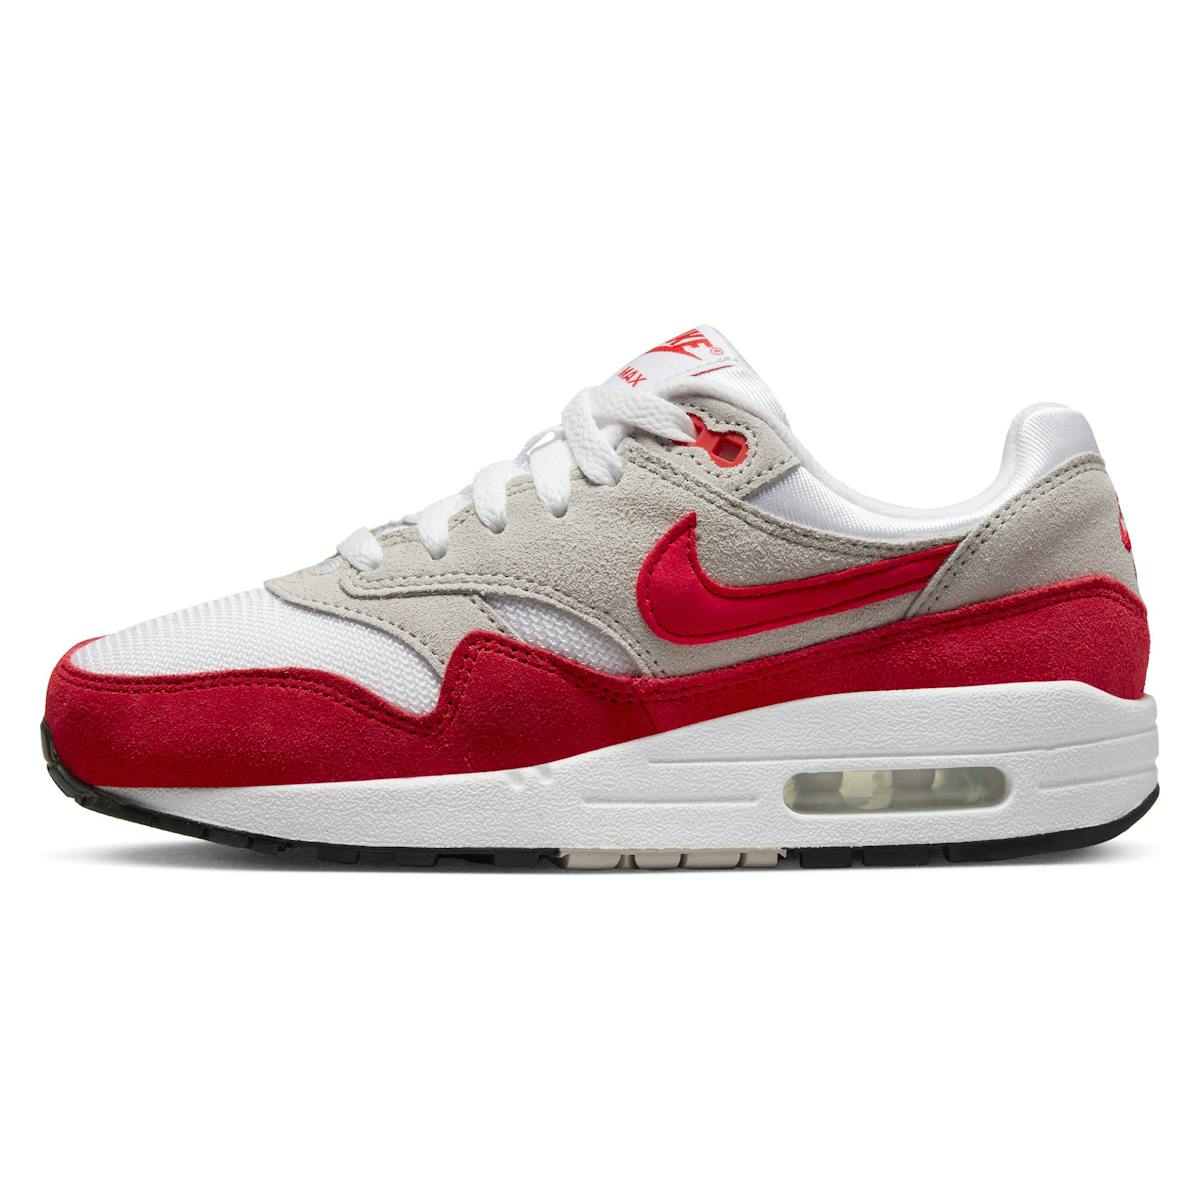 Nike Air Max 1 OG GS 'Challenge Red'